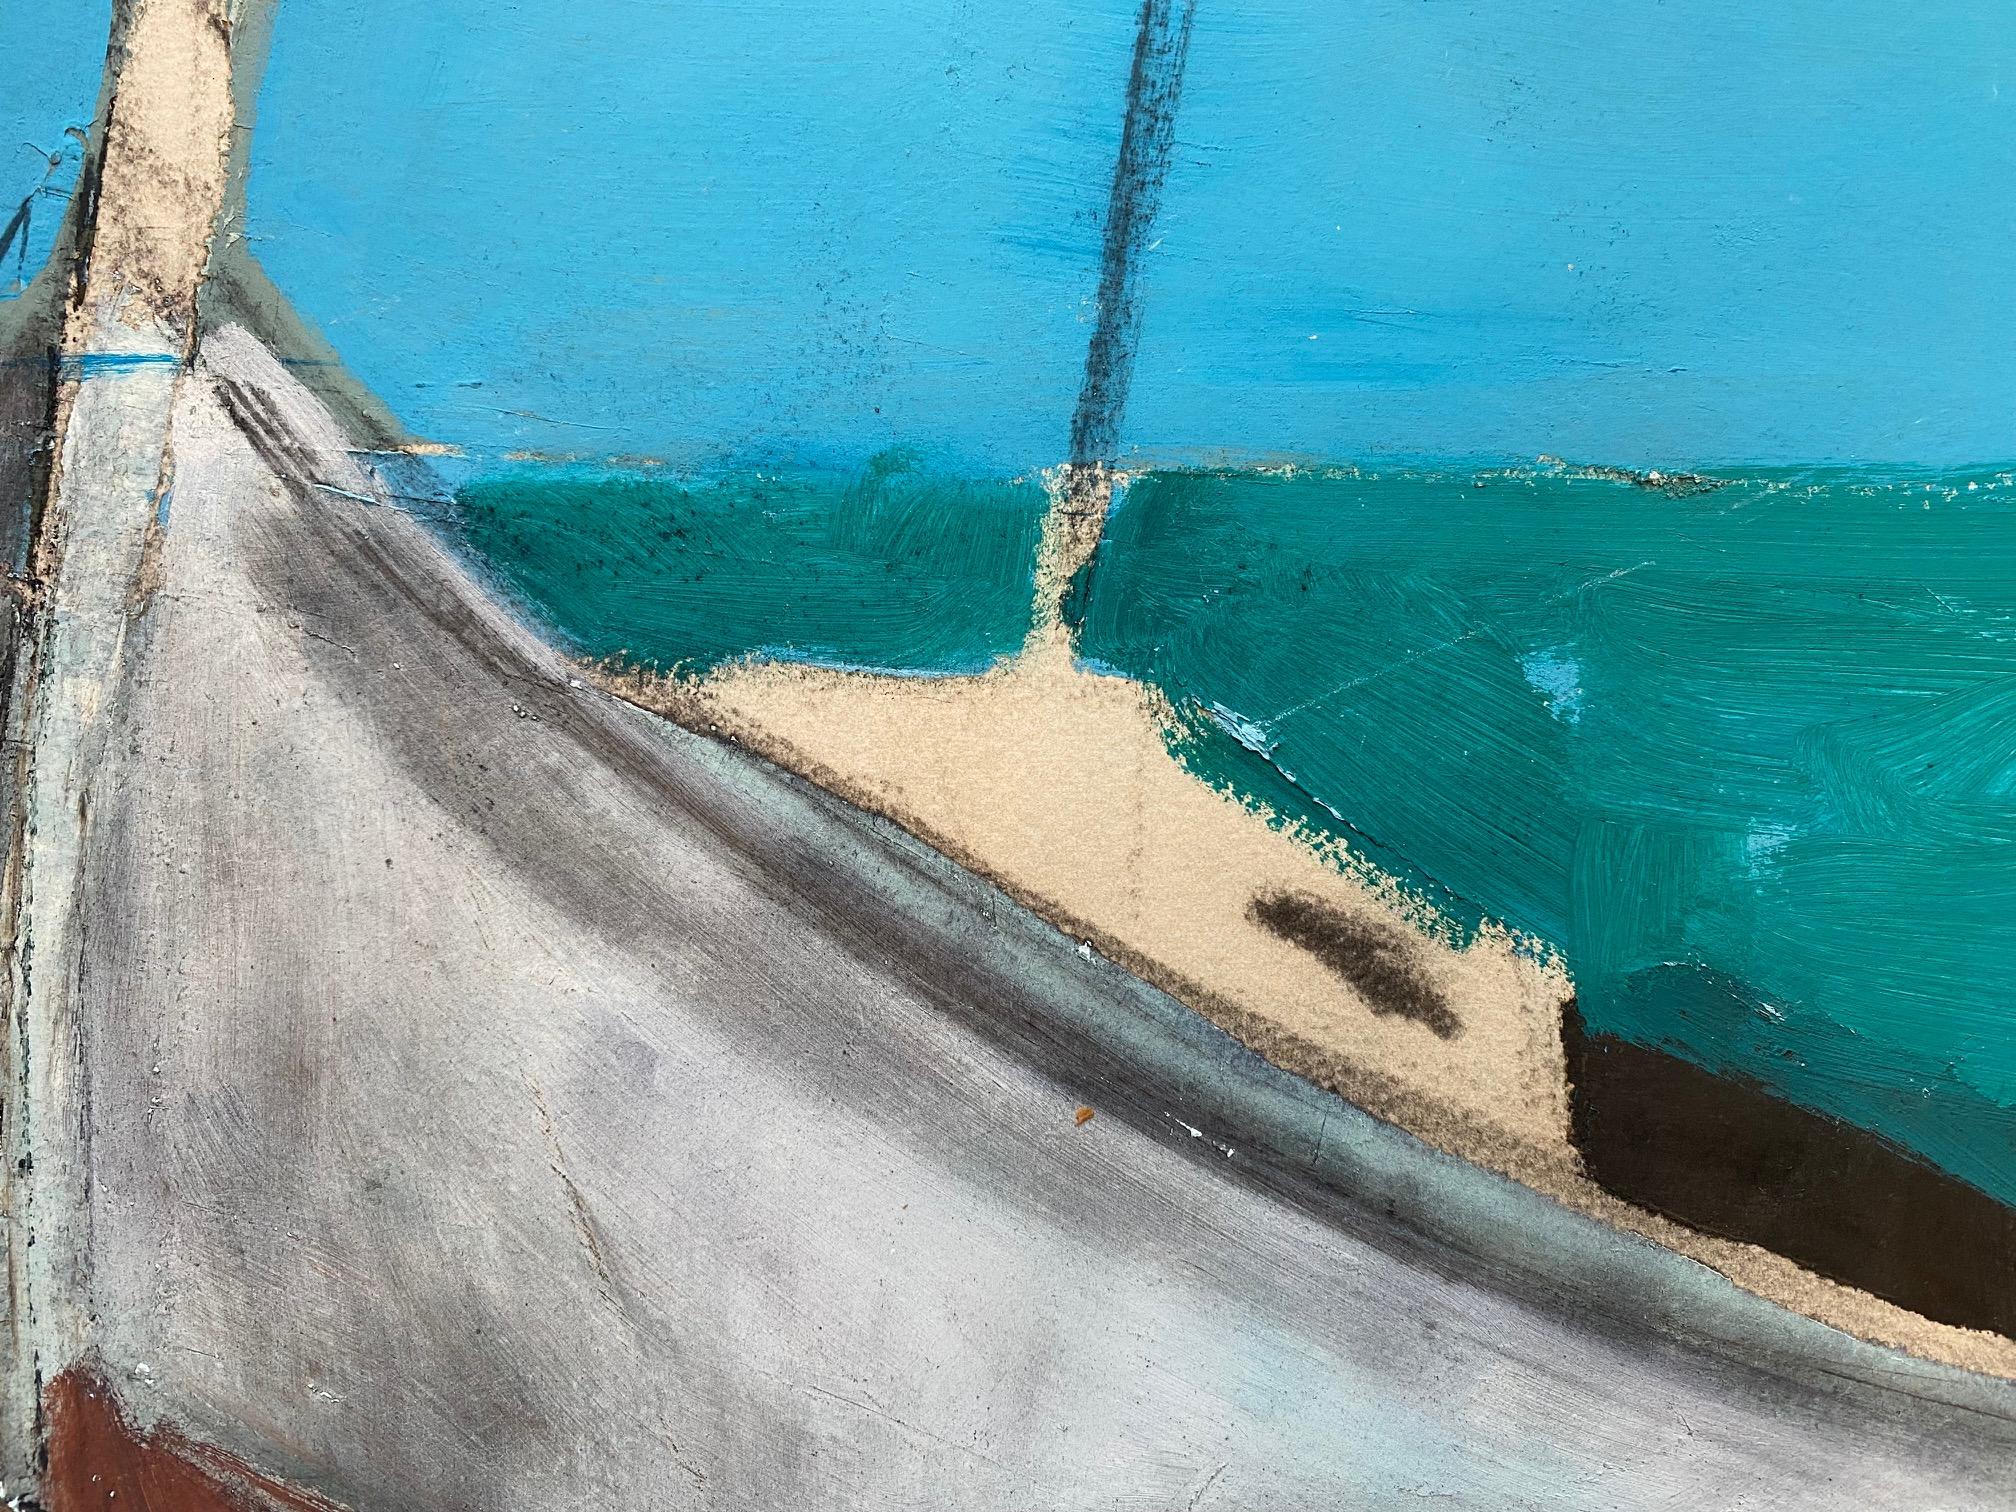 Boat in motion - Contemporary Painting by William Goliasch